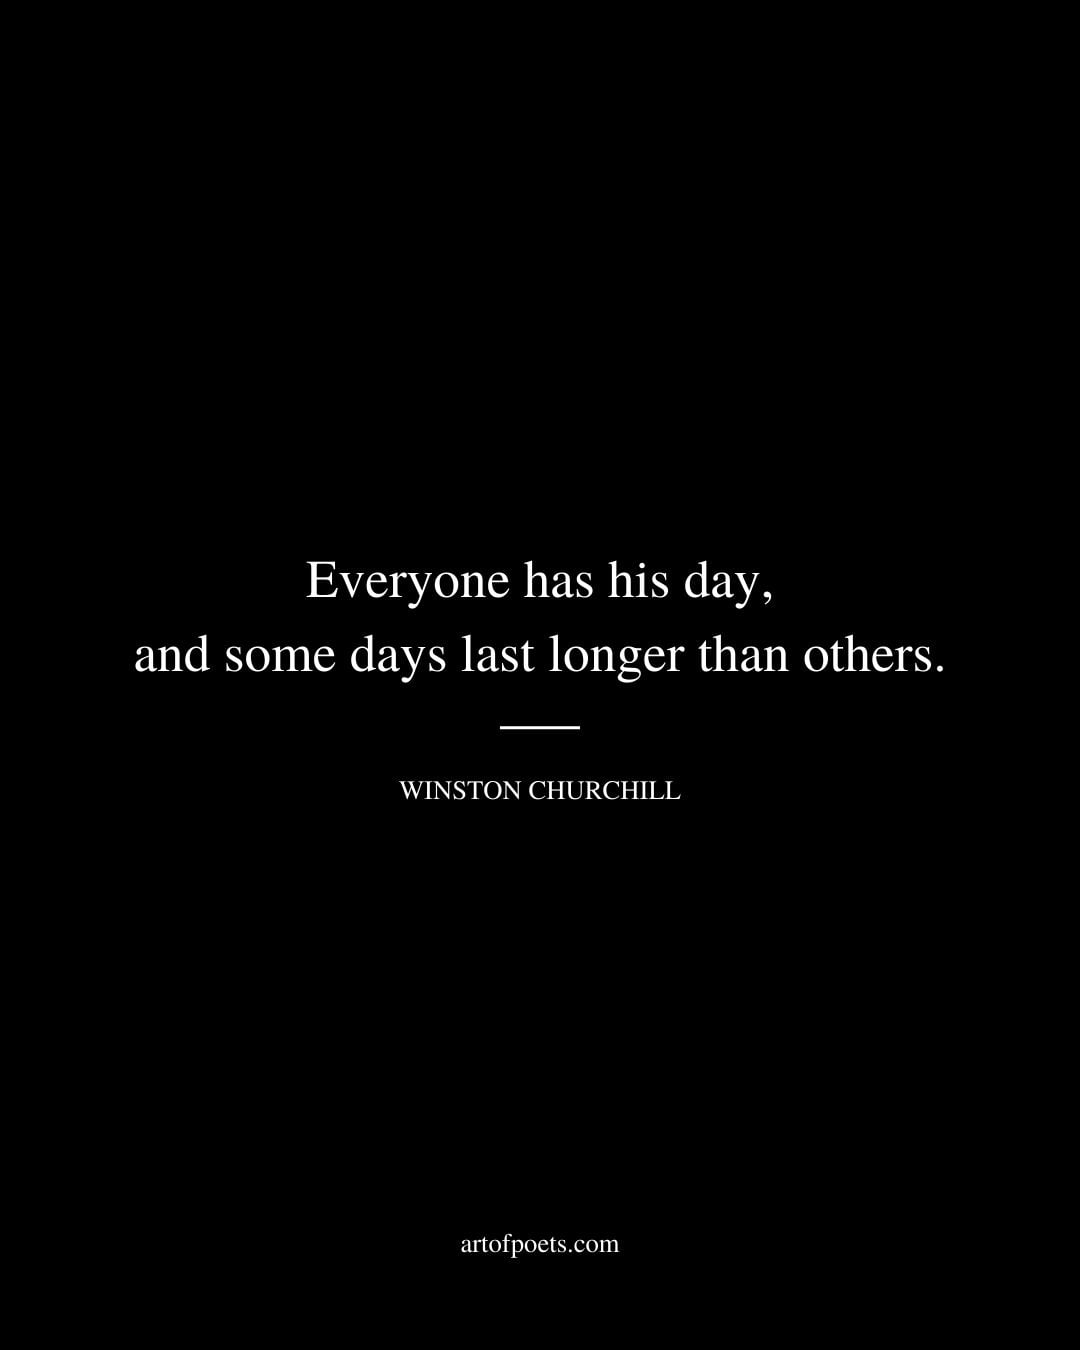 Everyone has his day and some days last longer than others